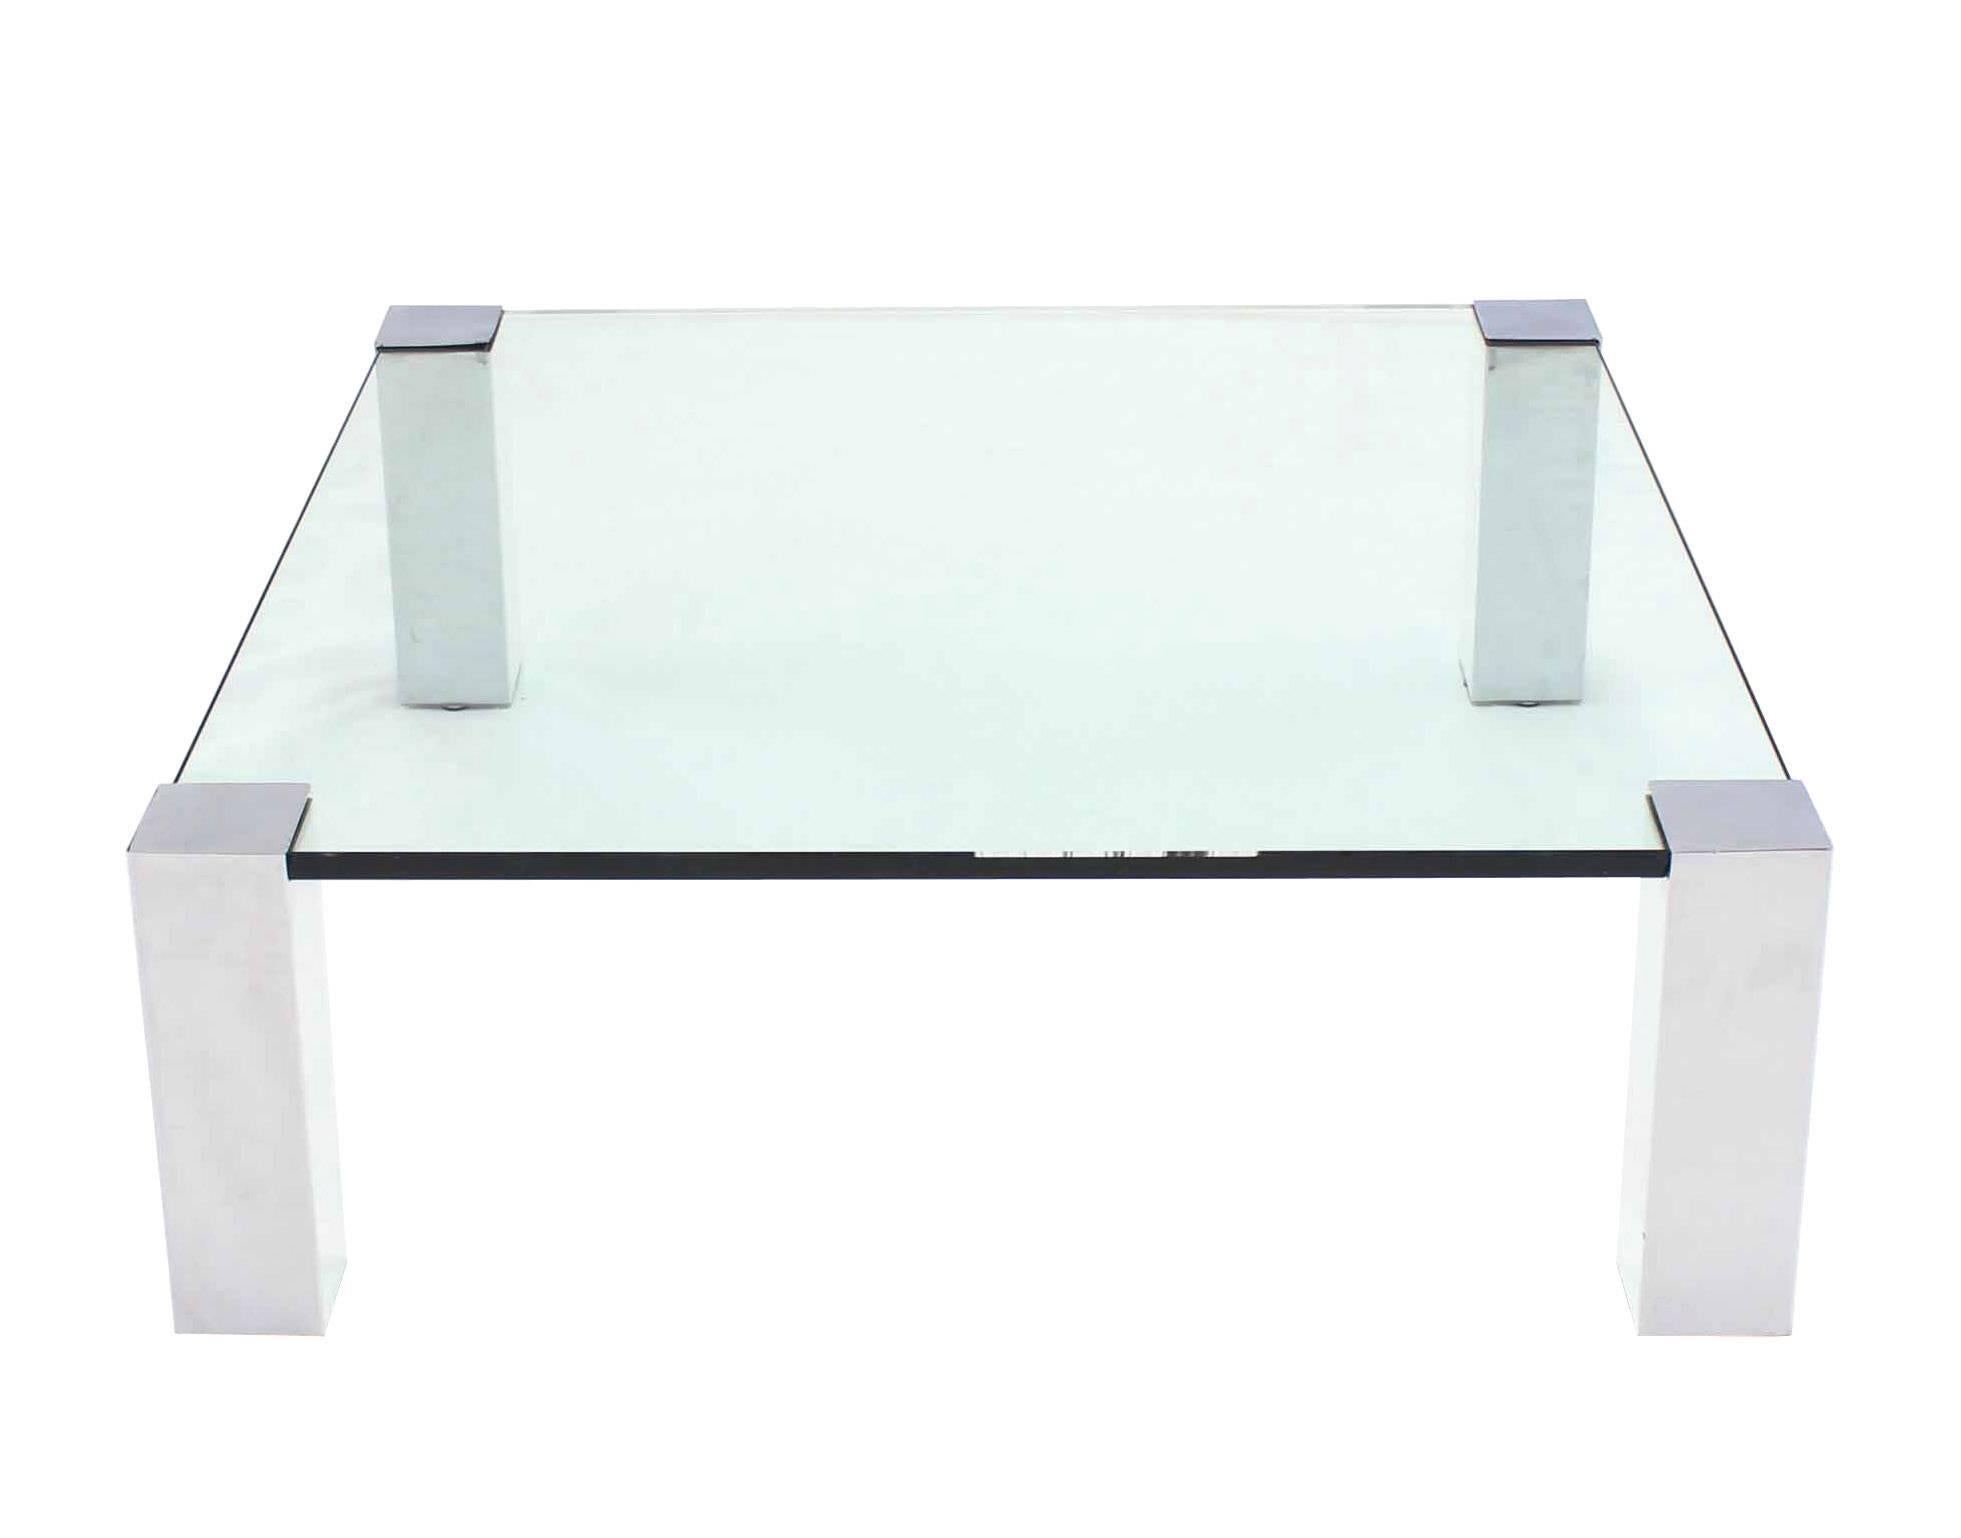 Very nice square coffee table with thick glass top and chrome legs. Measures: 41 x 41.